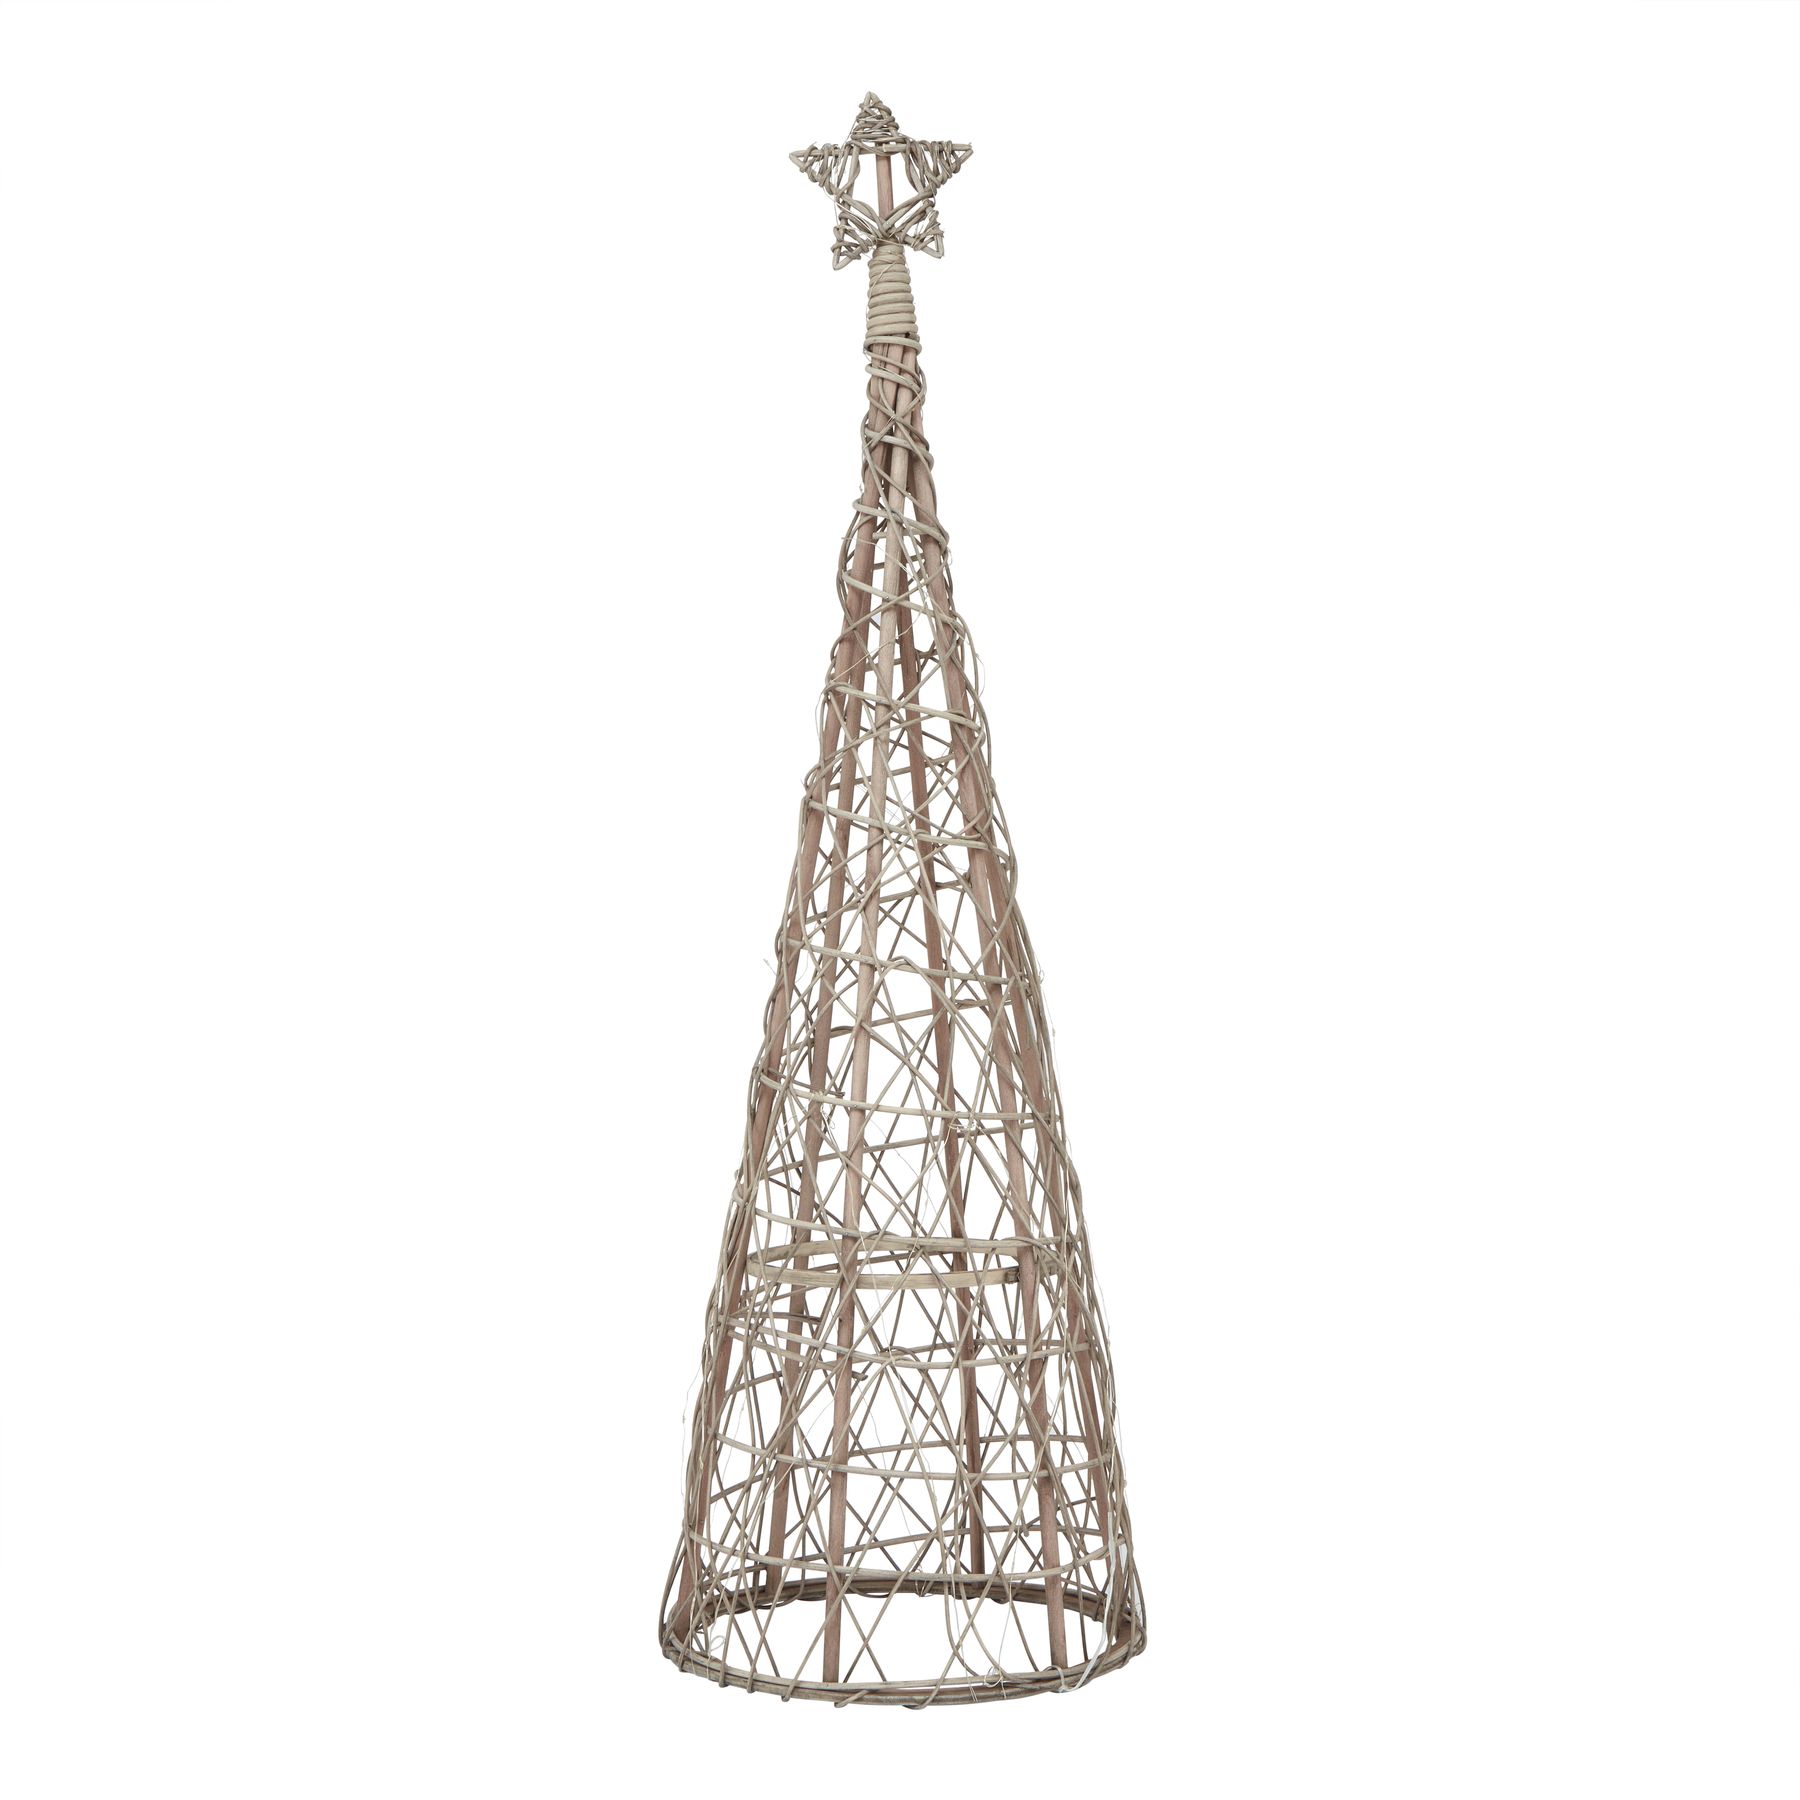 LED Wicker Christmas Tree With Star - Image 1